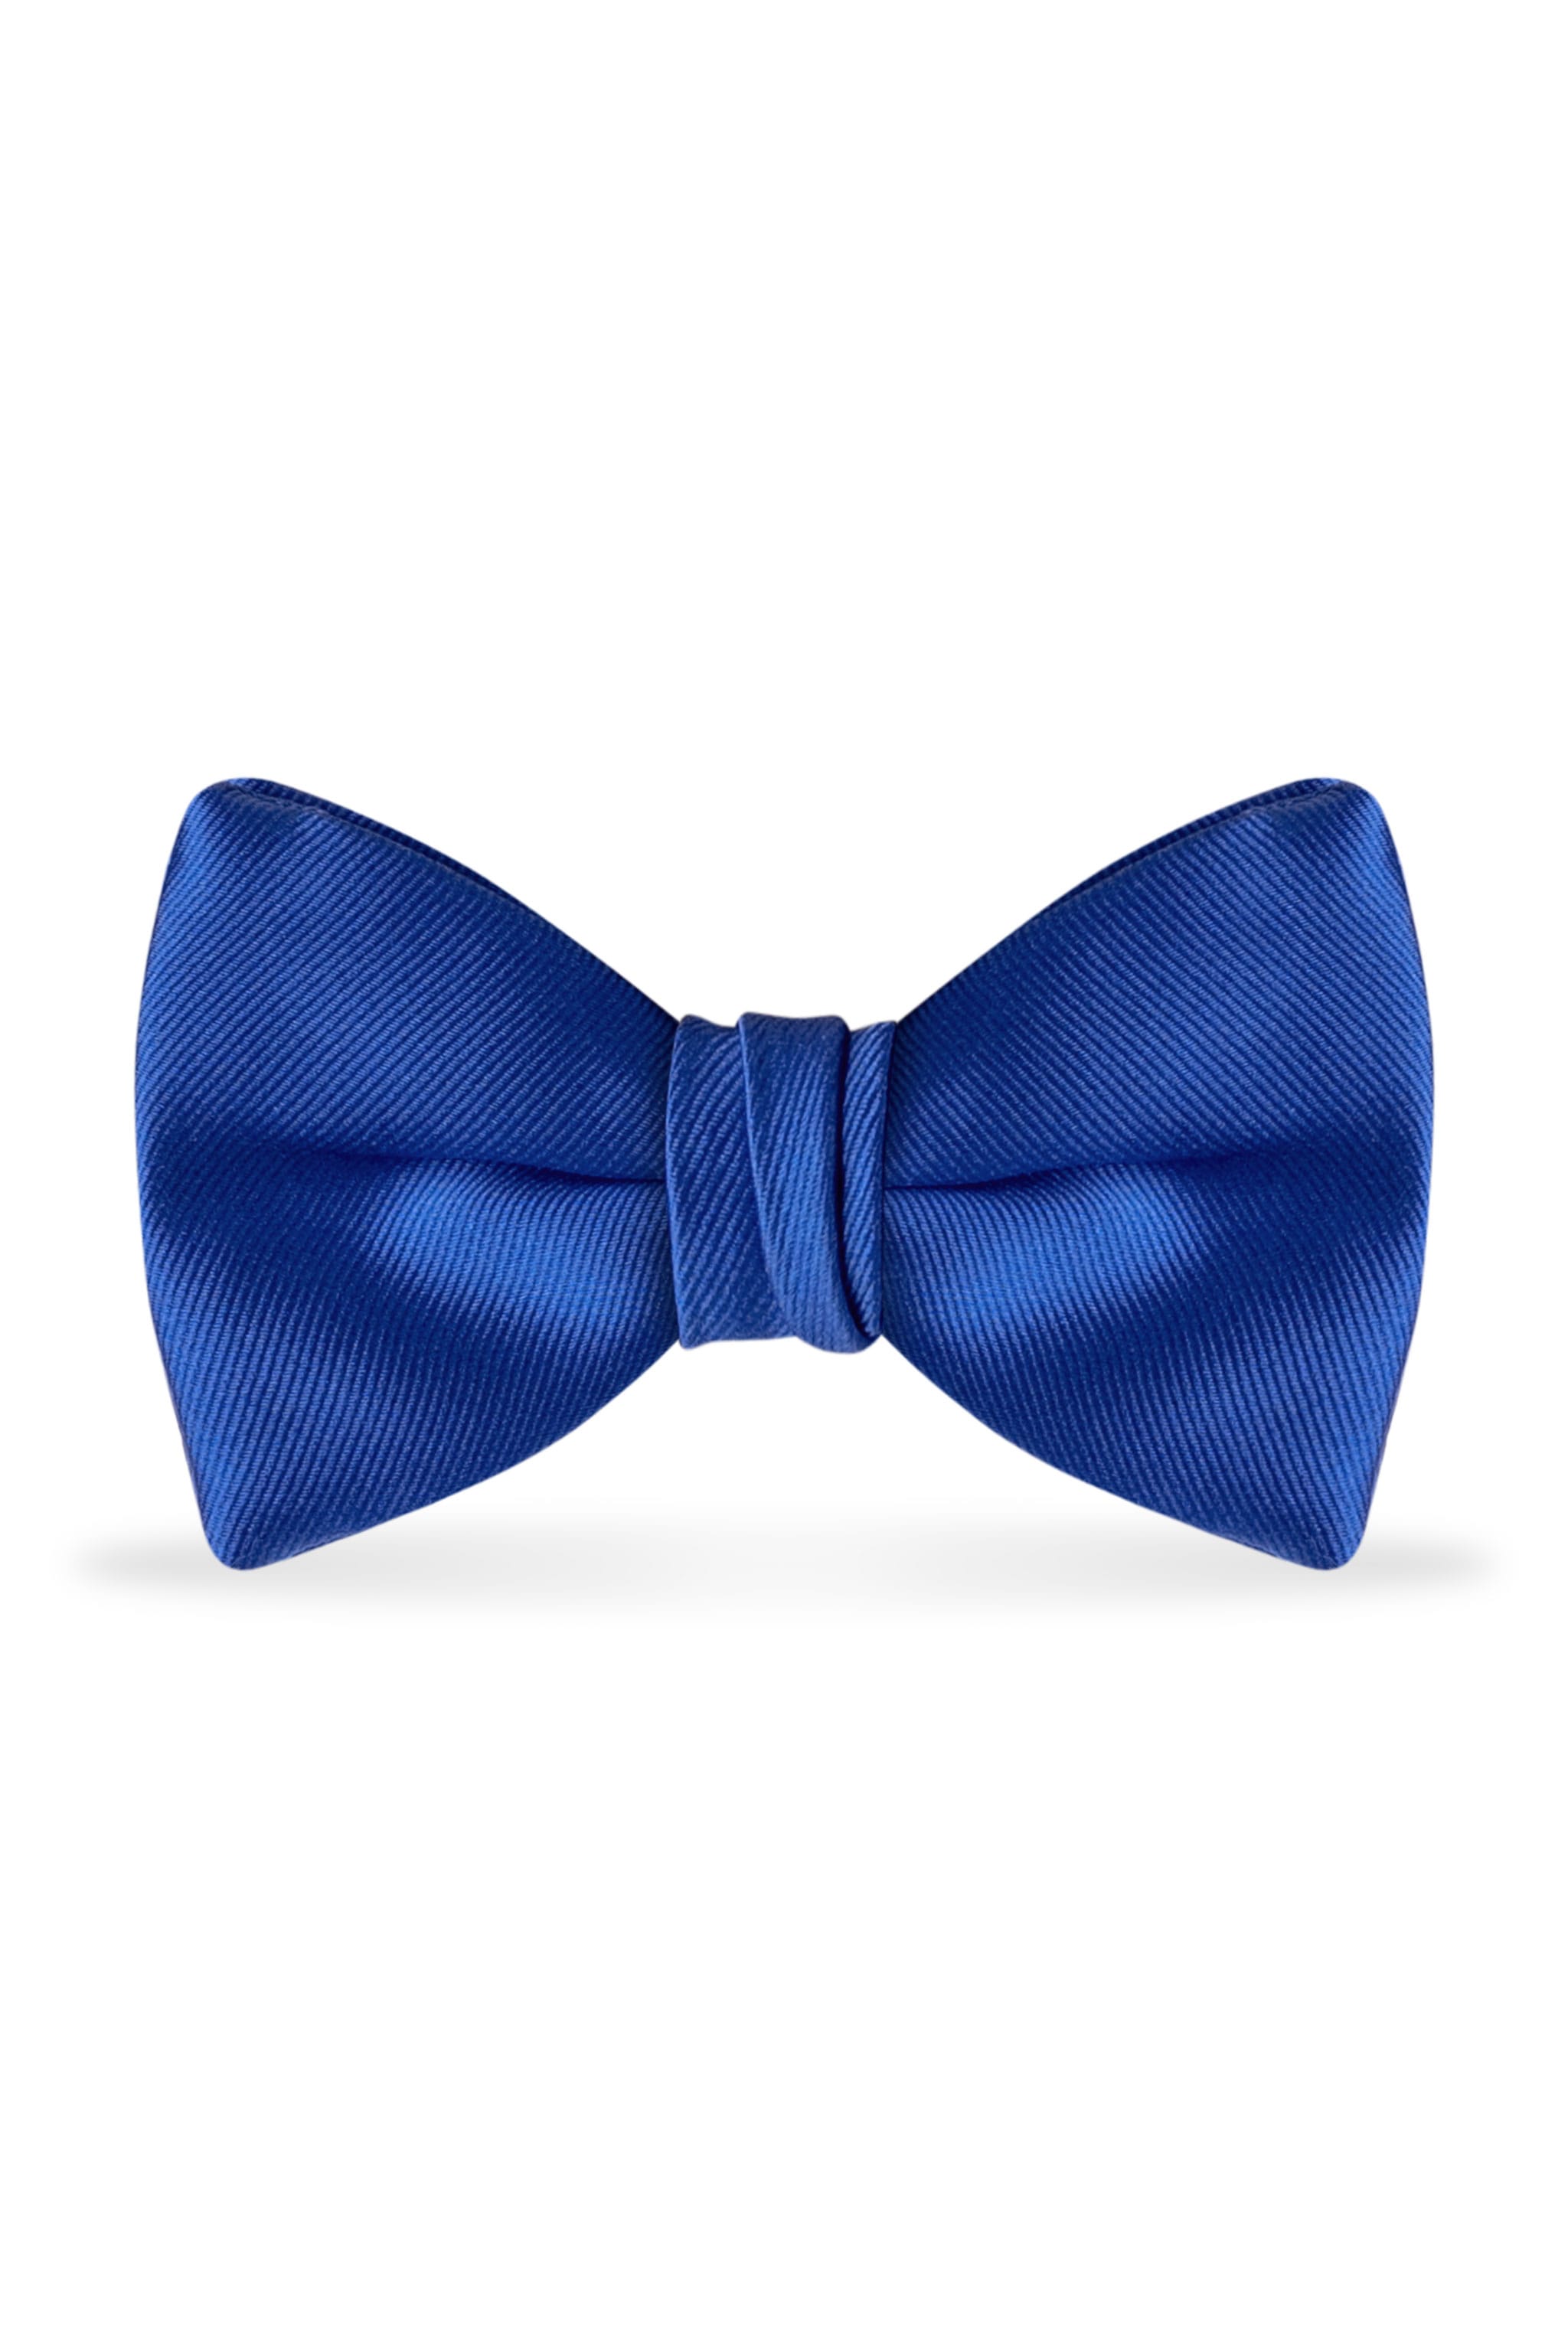 Solid Royal Blue Bow Tie